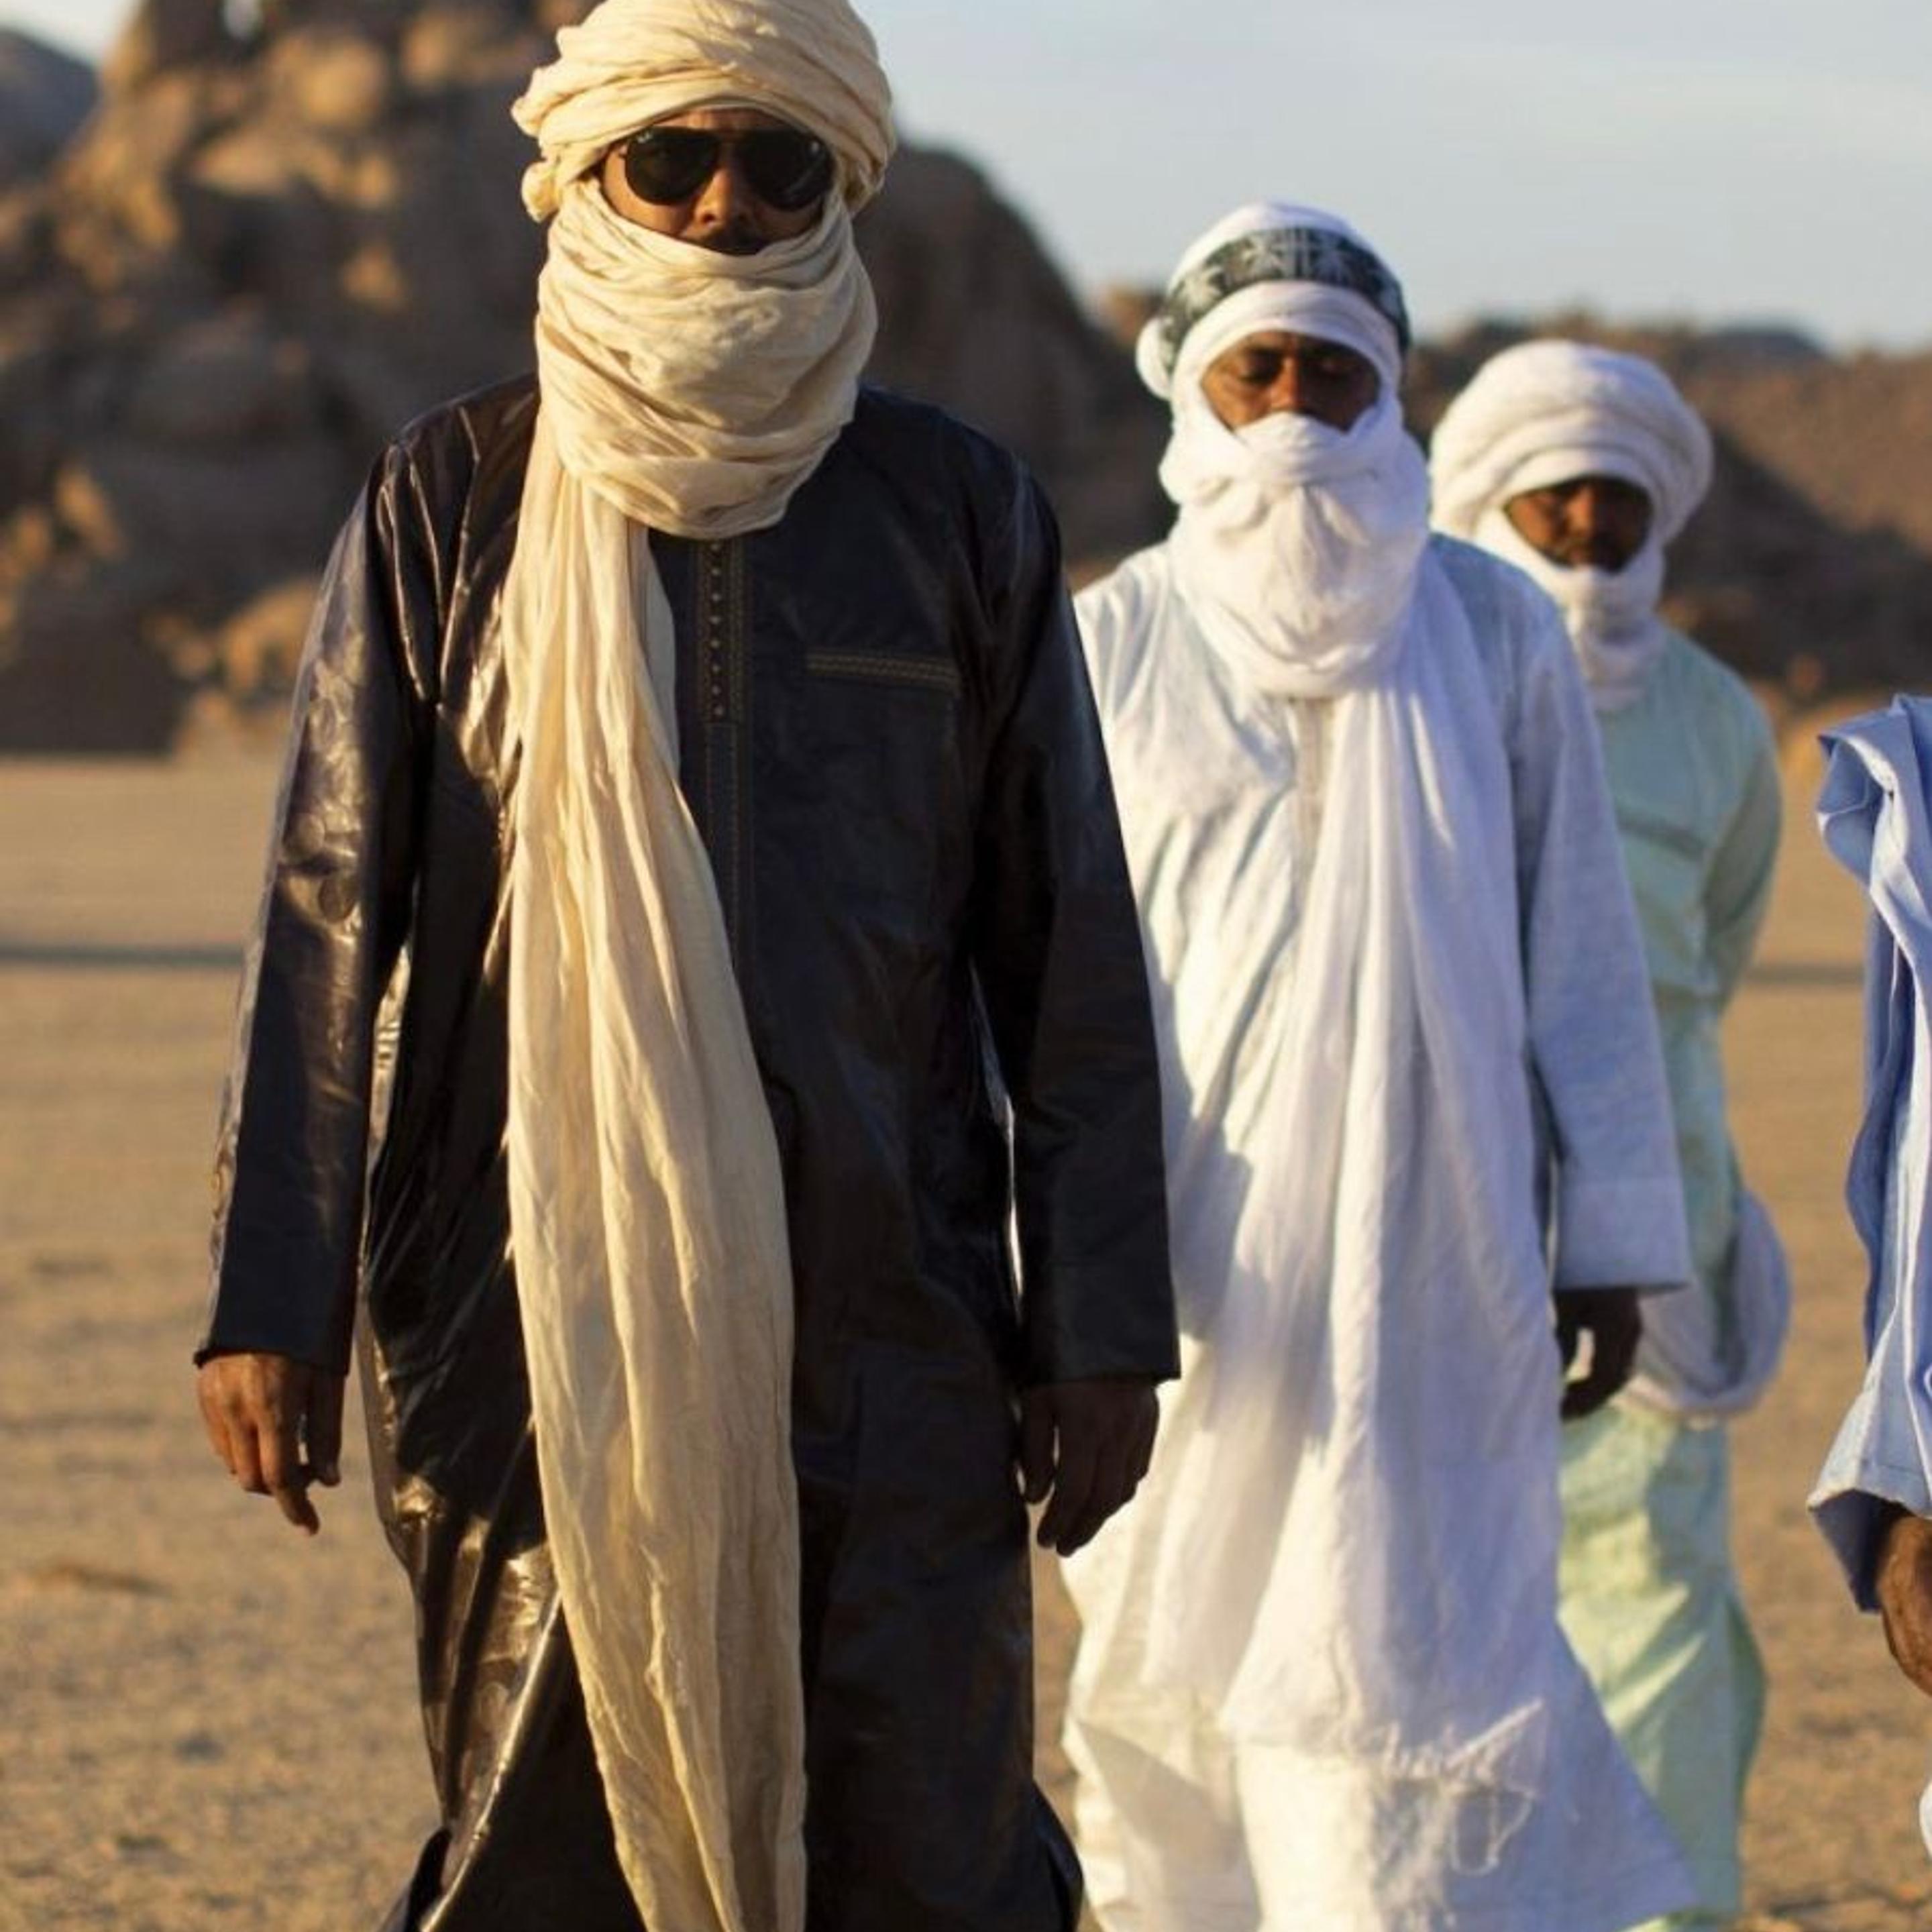 A group of men wearing white and blue robes and head coverings, in the desert.